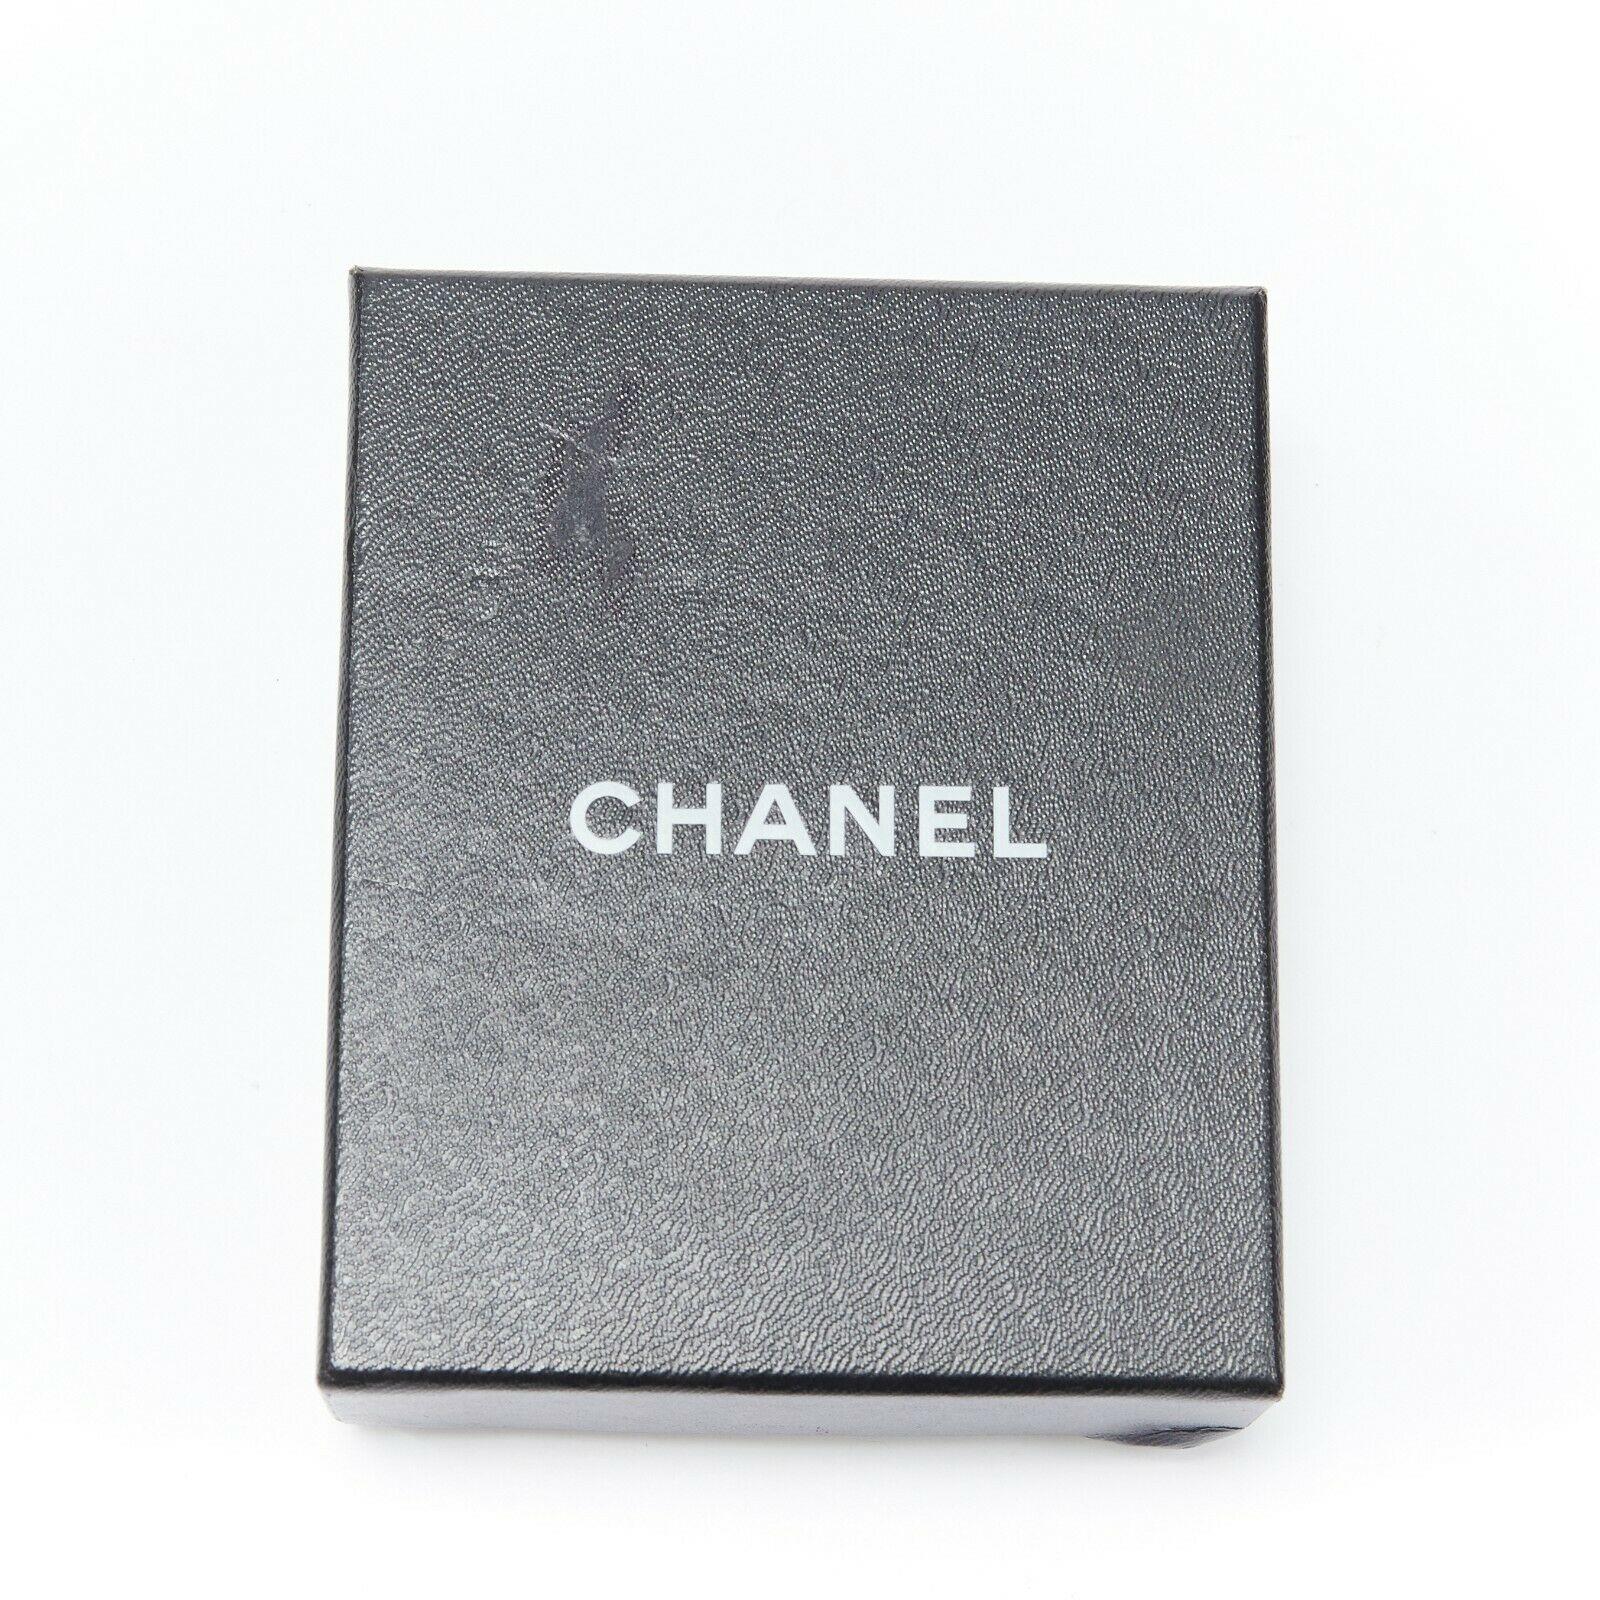 new CHANEL KARL LAGERFELD green clear plastic military resin shield badge brooch 3